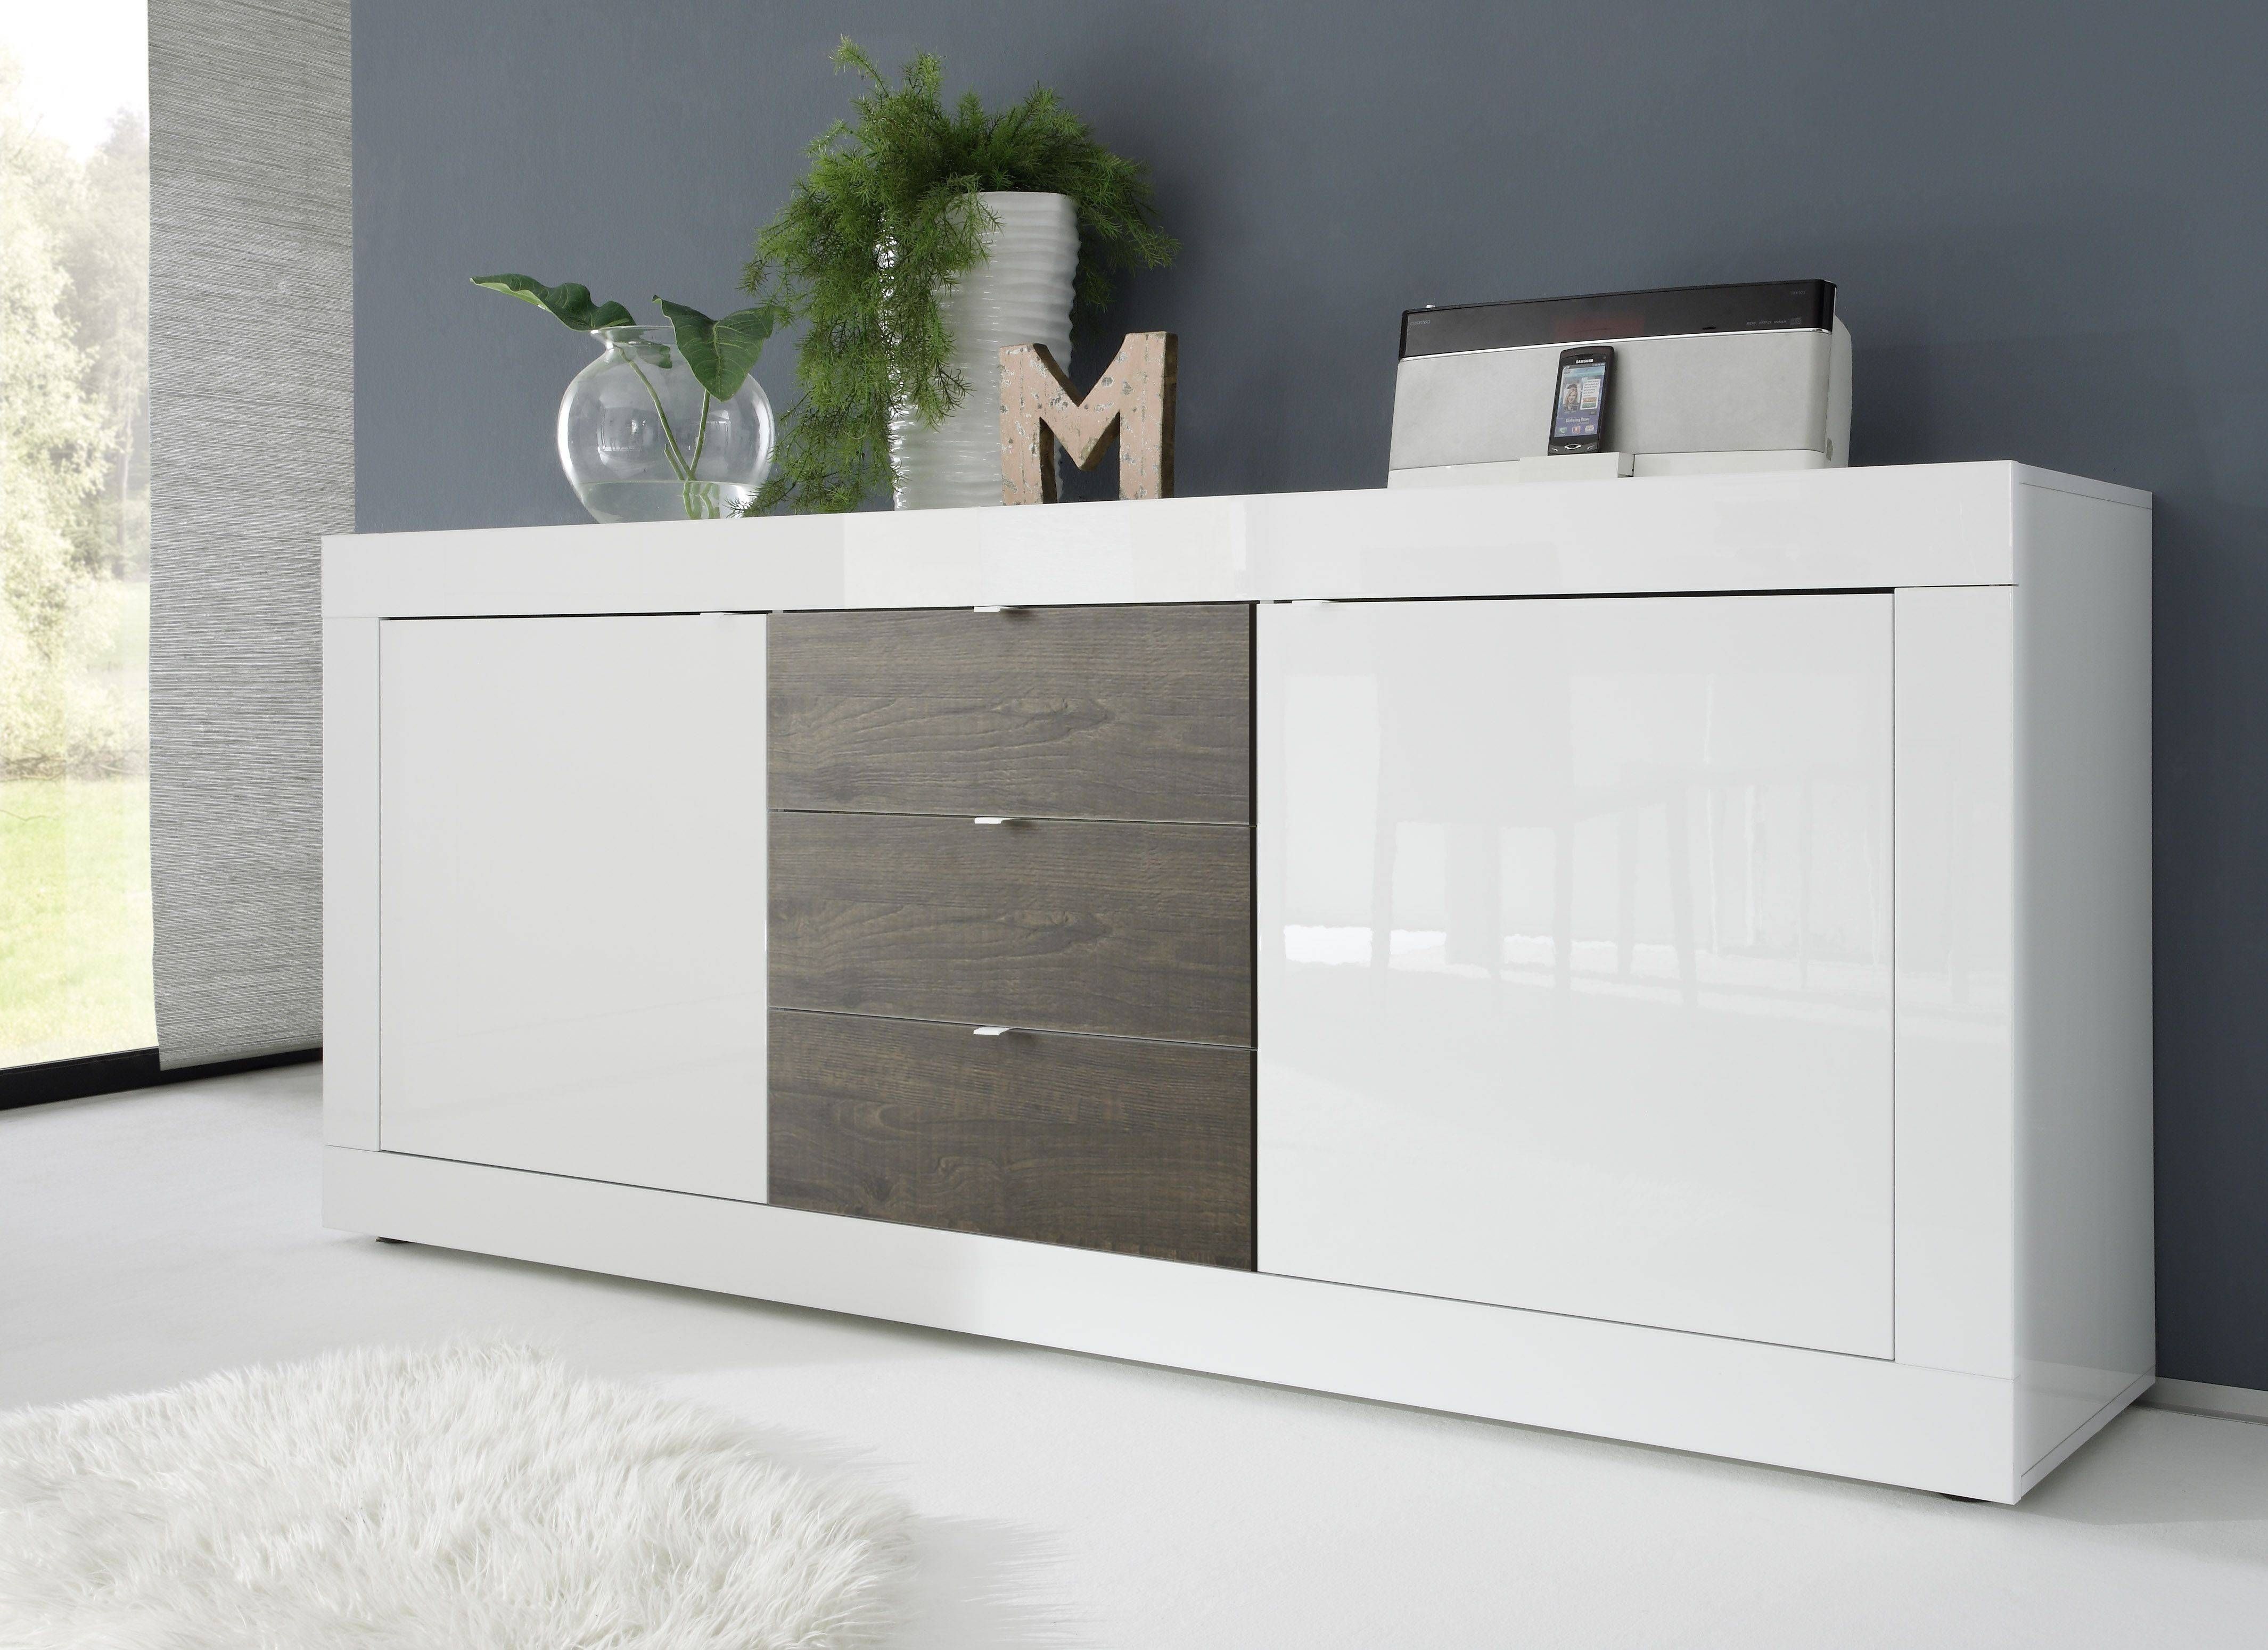 Dolcevita Three Door Sideboard In White Gloss – Sideboards – Sena With White Gloss Sideboards (View 2 of 30)